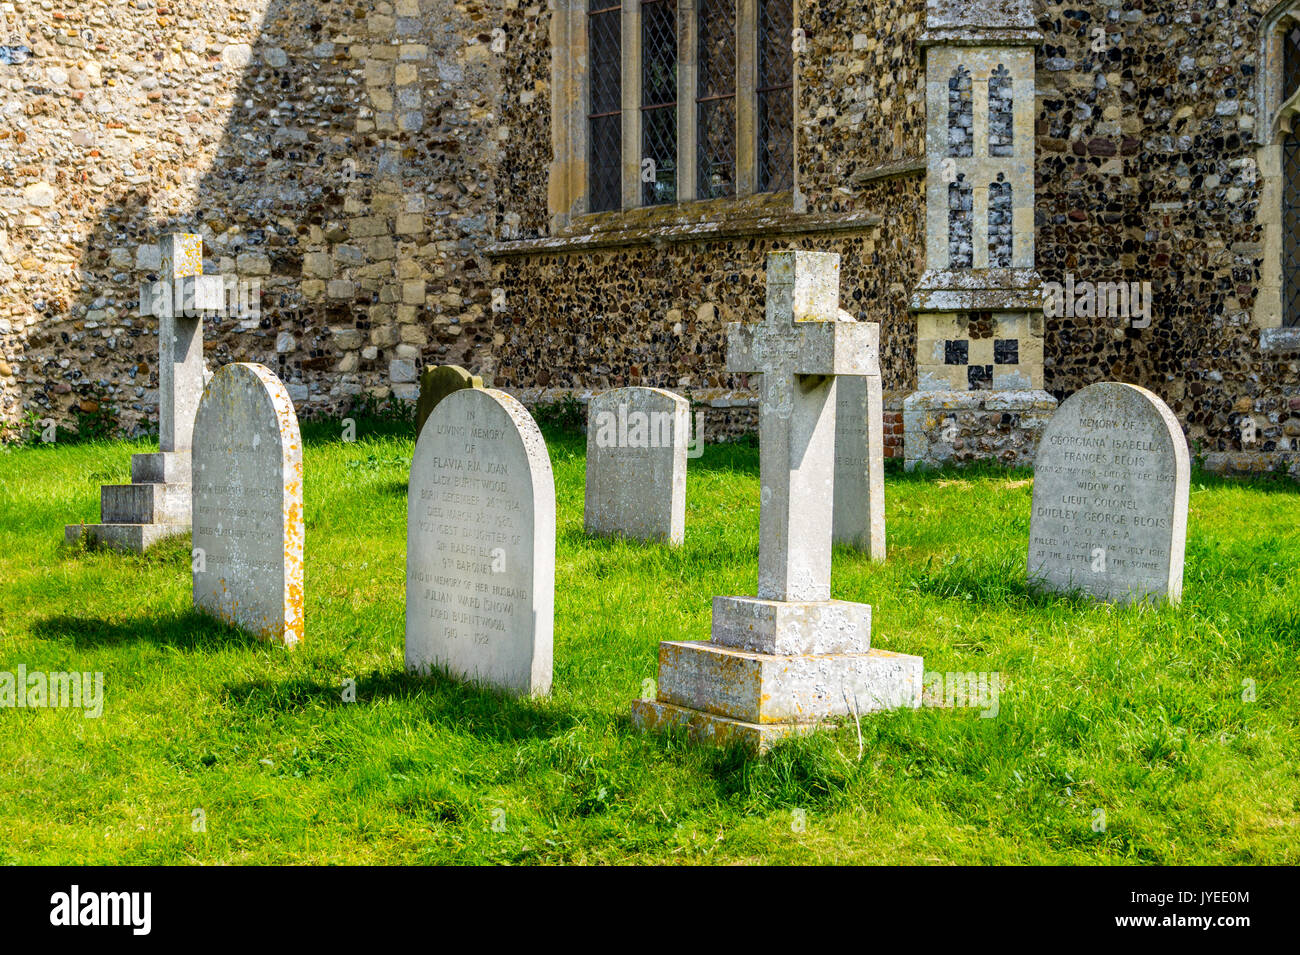 Burial plot of the Blois family in the shadow of the tower, Holy Trinity Church, Blythburgh, Suffolk, England Stock Photo